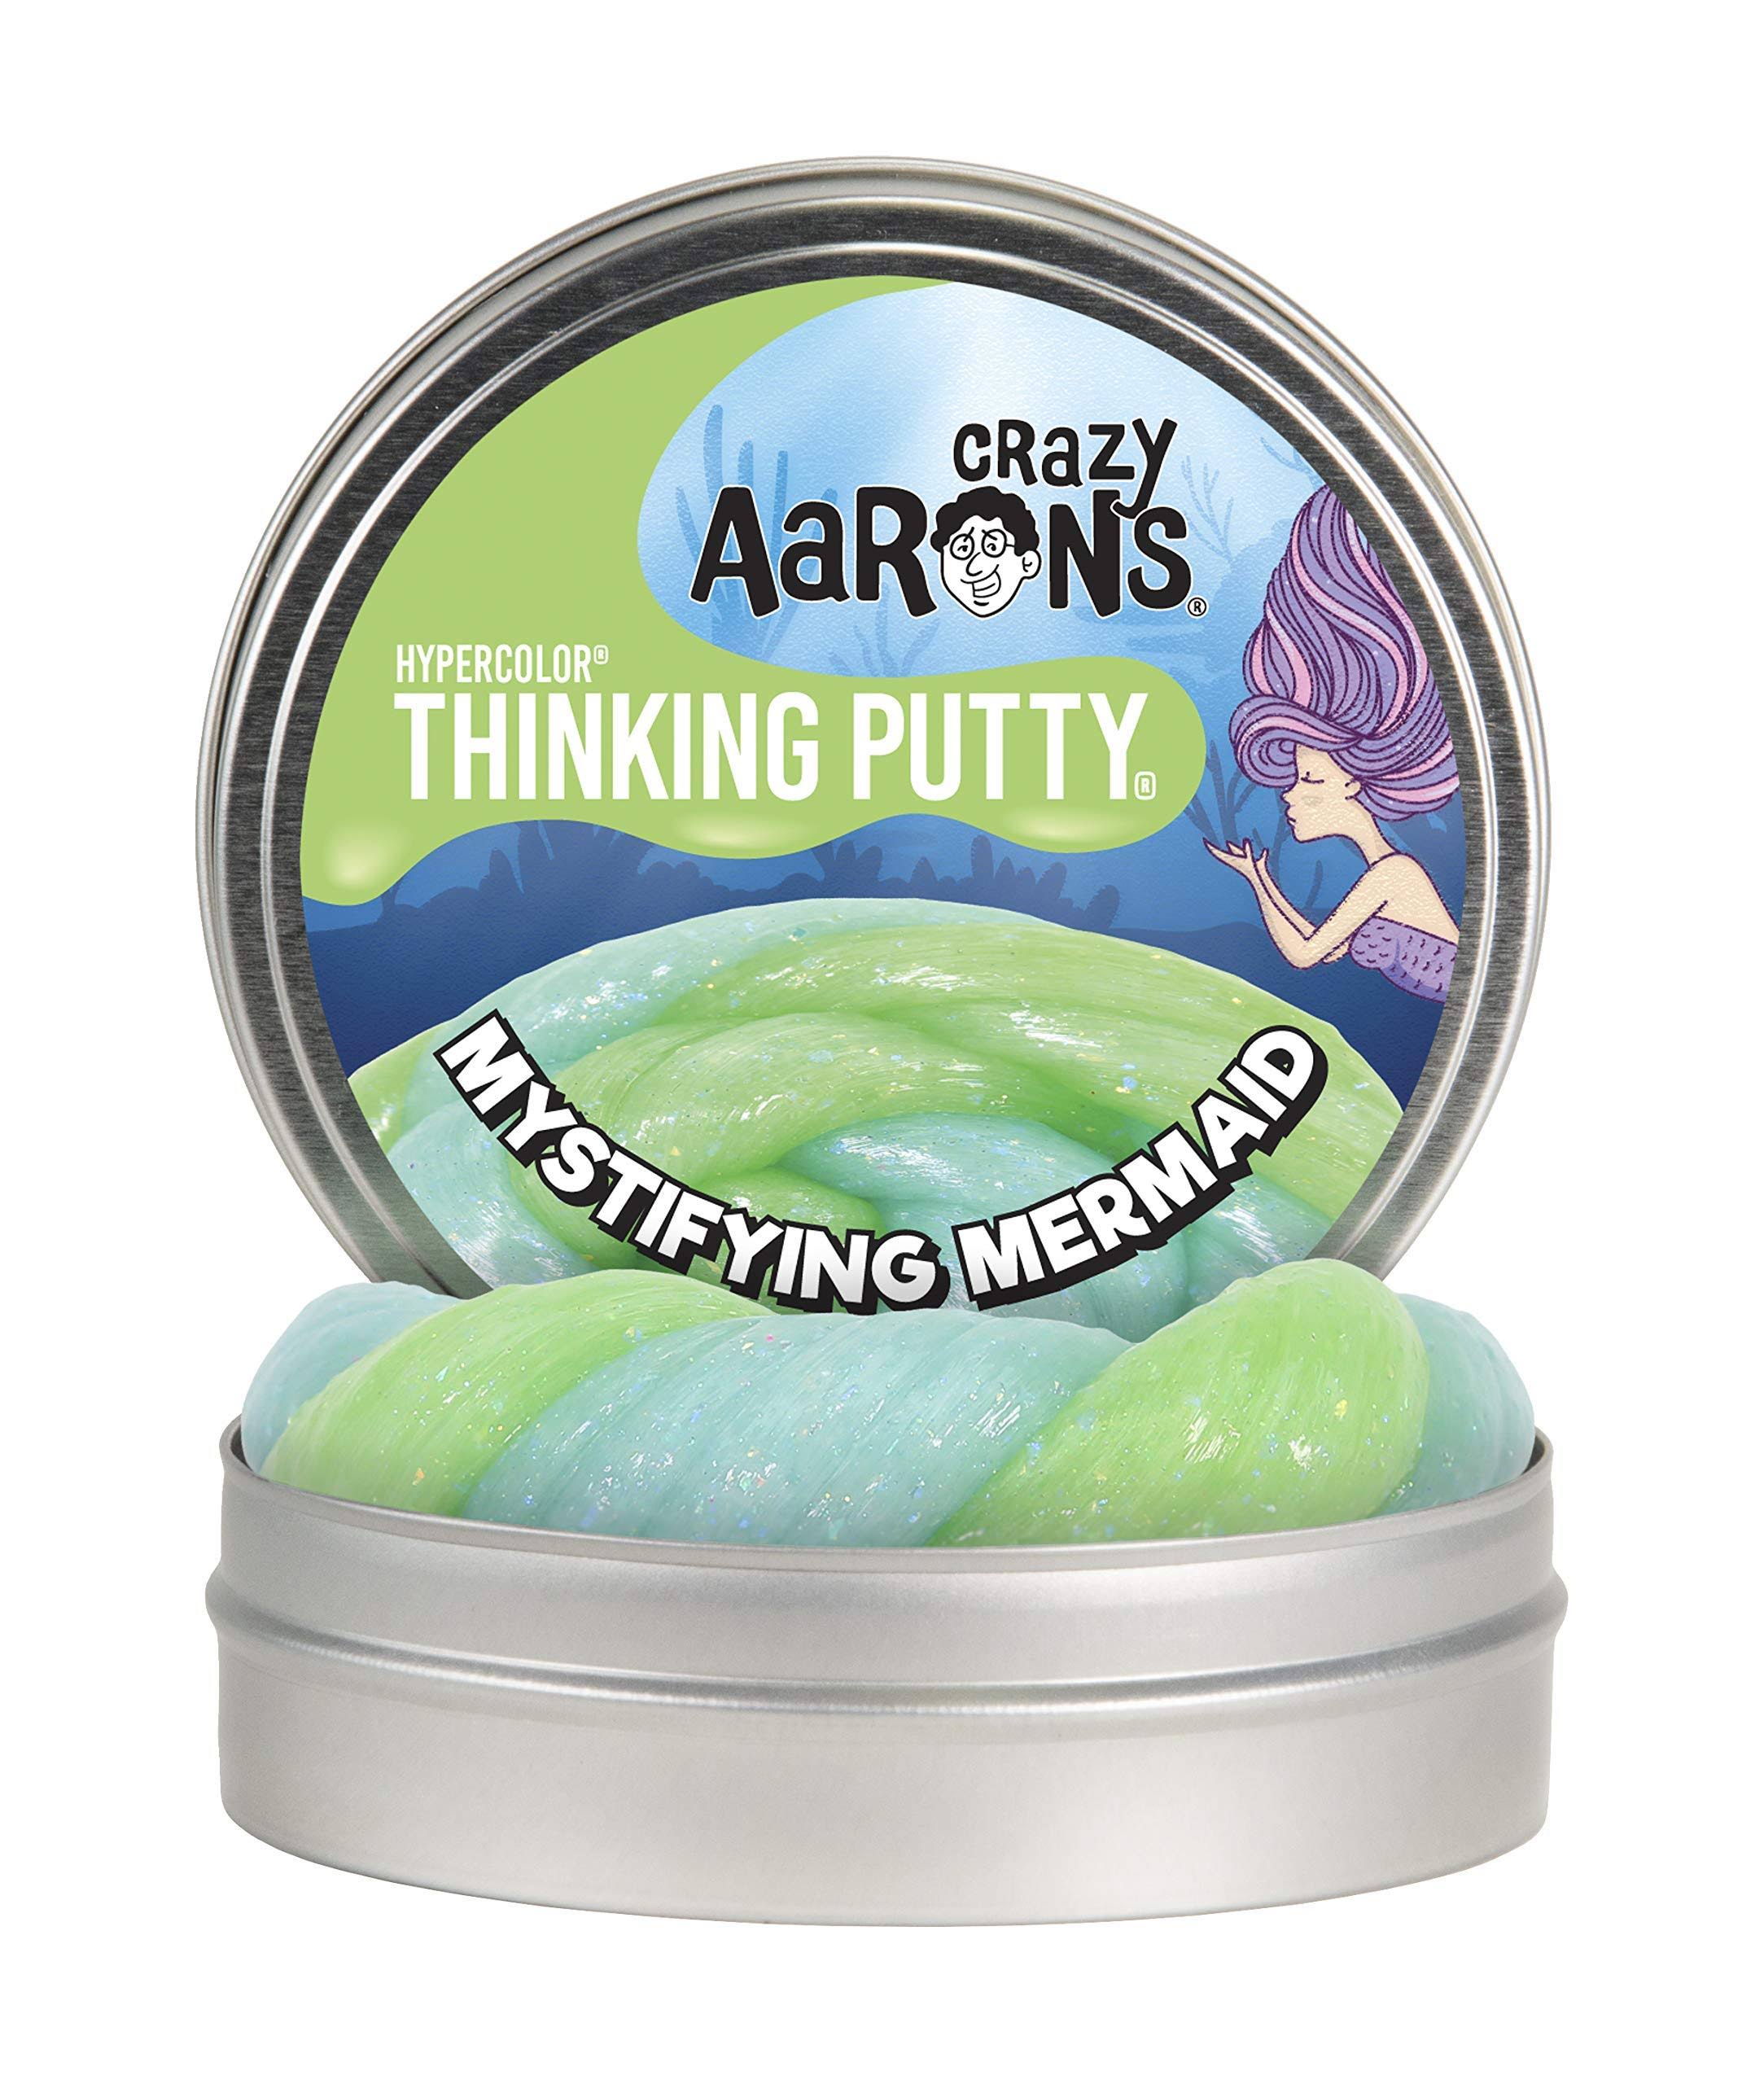 Crazy Aarons Thinking Putty Mystifying Mermaid